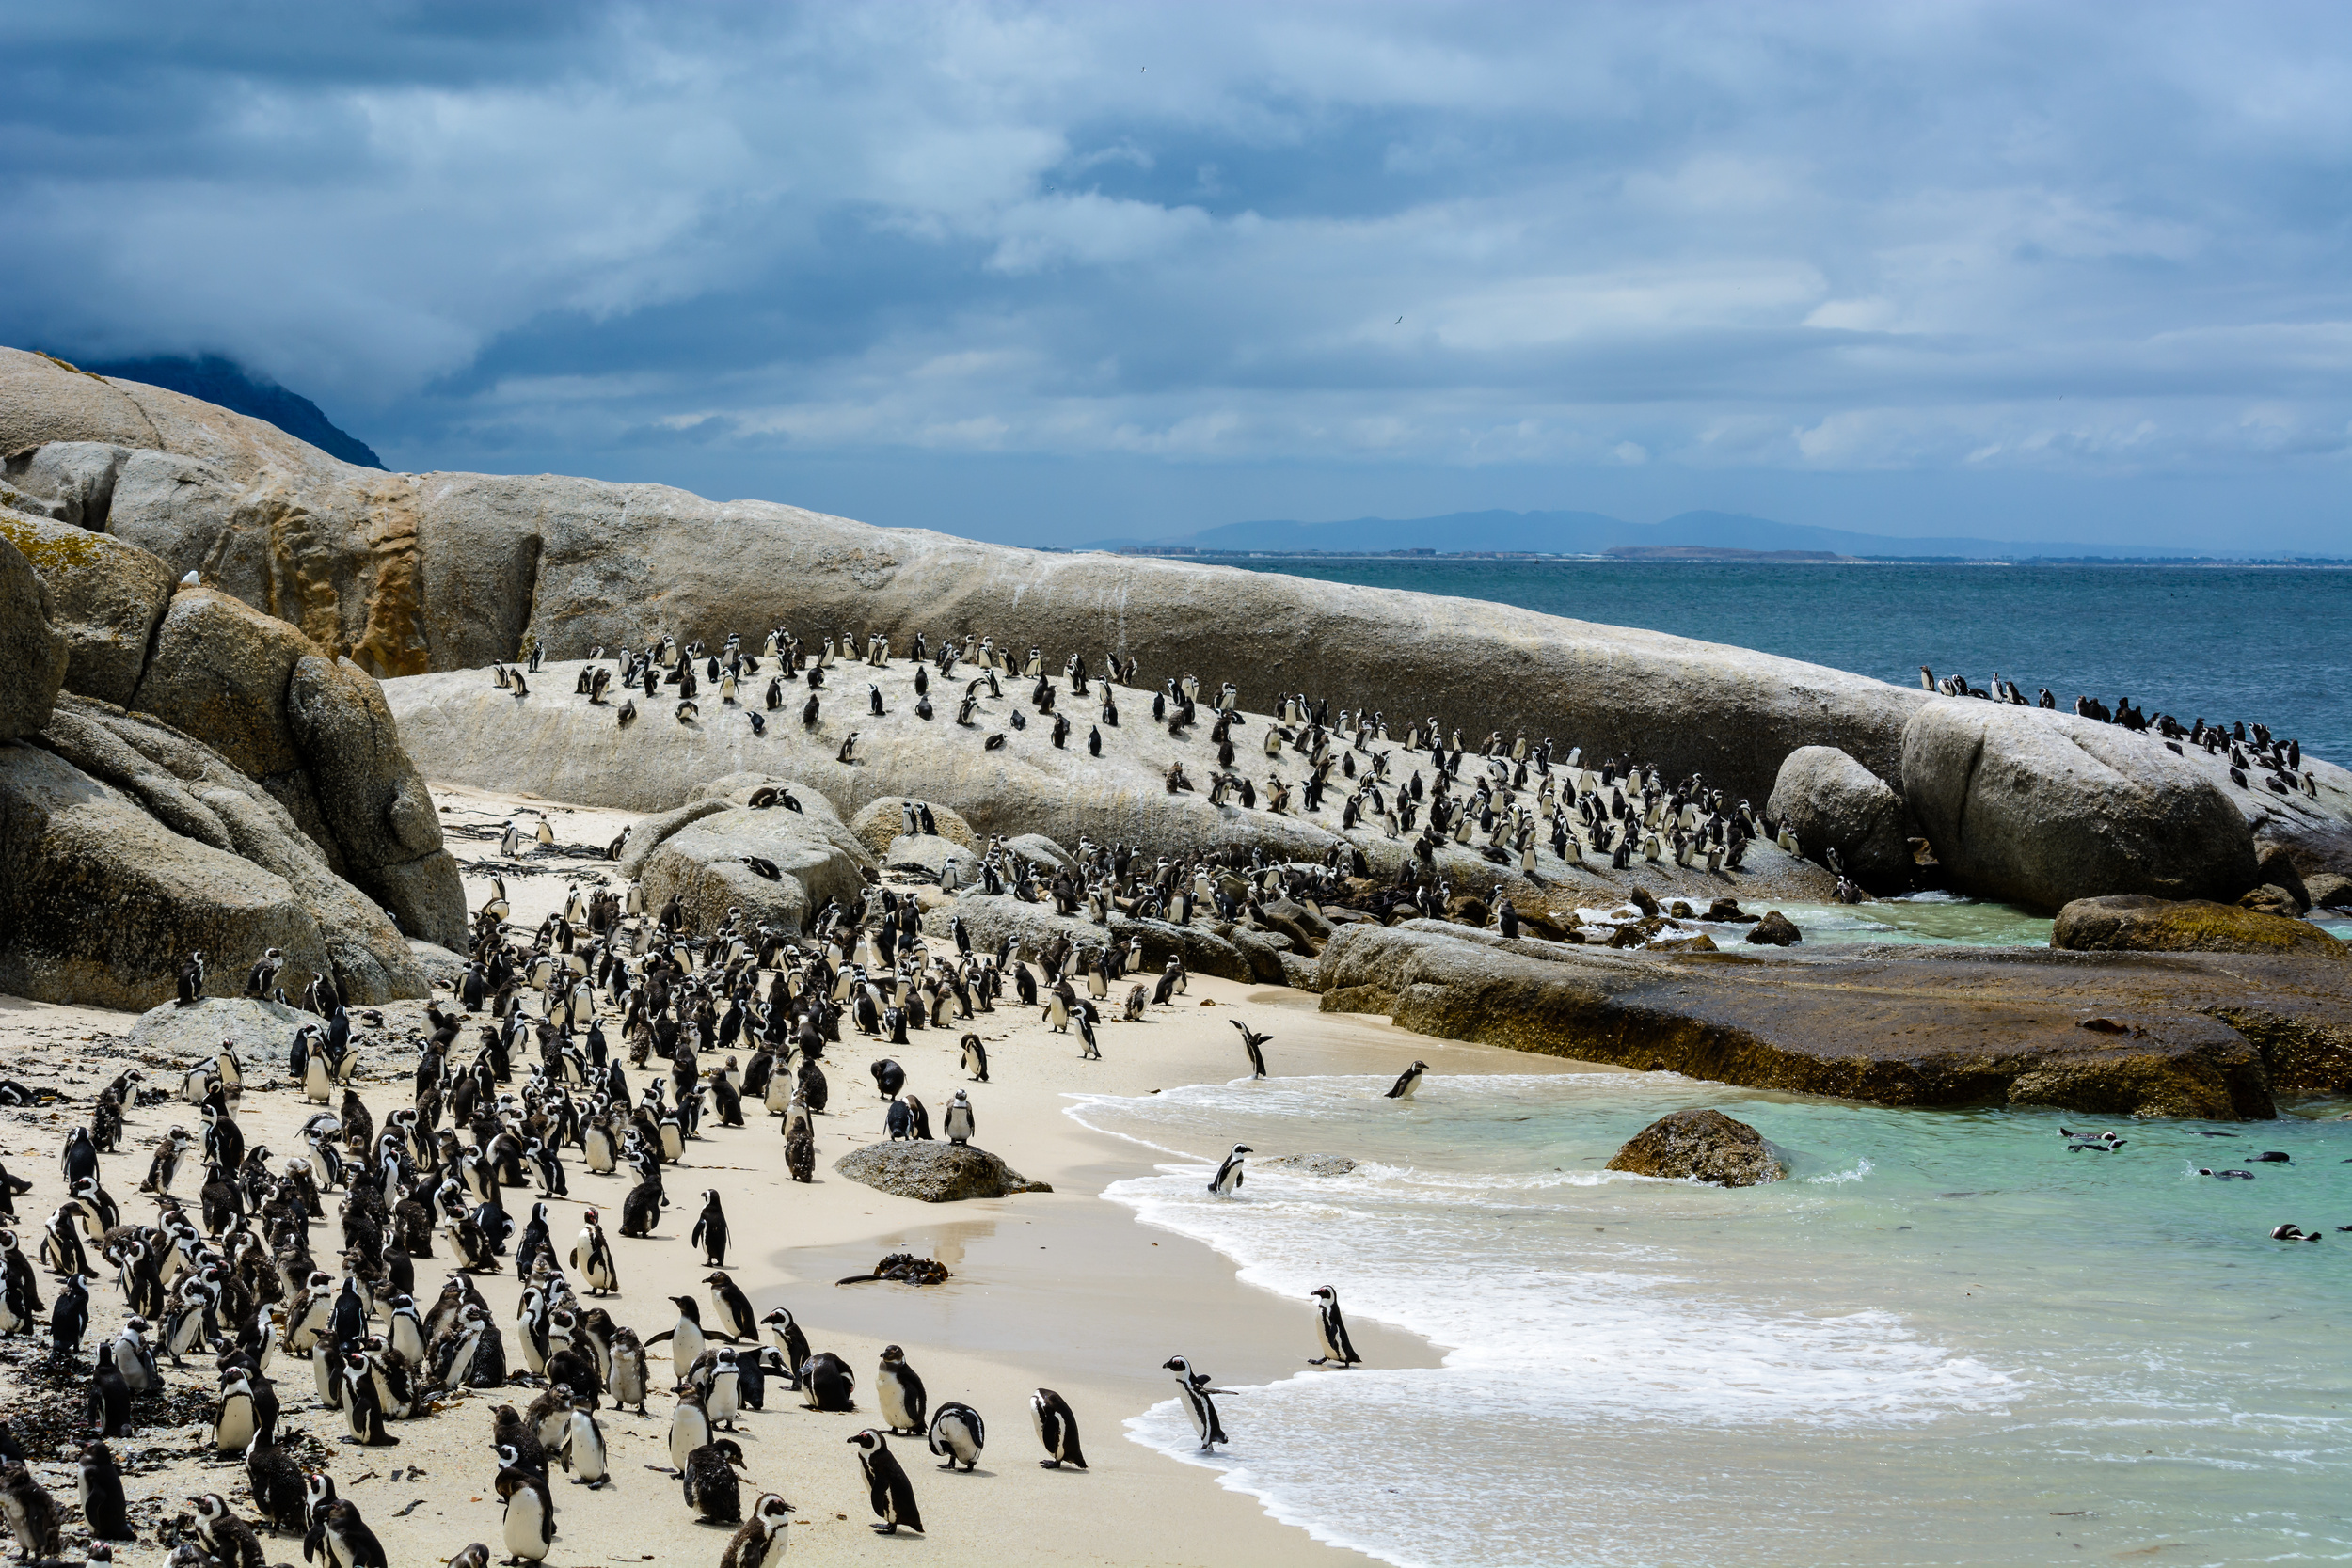 <p>Did you know that penguins don’t just live in the Antarctic? As southern hemisphere creatures, you’ll find cuties in various countries below the equator, including South Africa. Port Elizabeth is the best place to visit if you want to catch a glimpse of the cute African penguins, where they recently set up homes, thanks to the lack of predators.</p><p><a href='https://www.msn.com/en-us/community/channel/vid-cj9pqbr0vn9in2b6ddcd8sfgpfq6x6utp44fssrv6mc2gtybw0us'>Follow us on MSN to see more of our exclusive lifestyle content.</a></p>